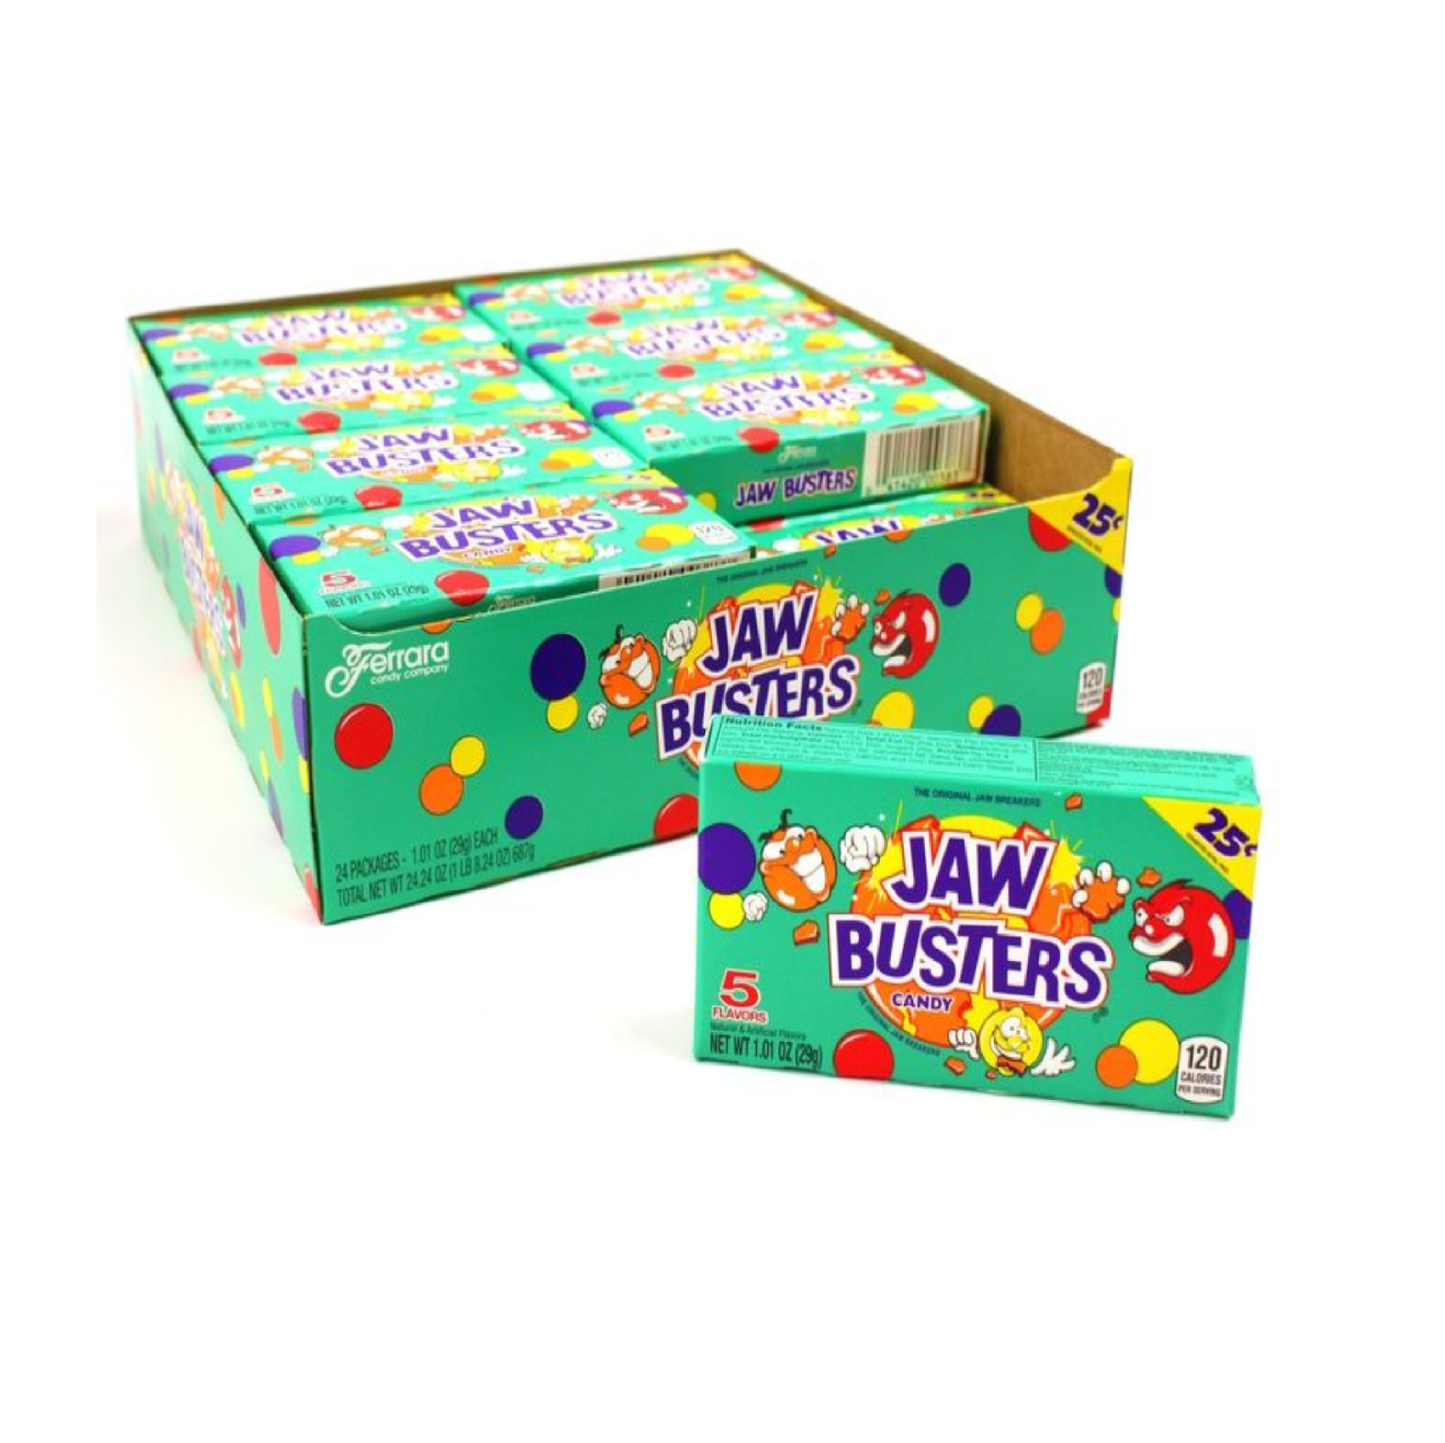 Jaw Busters 23g (24 Boxes)